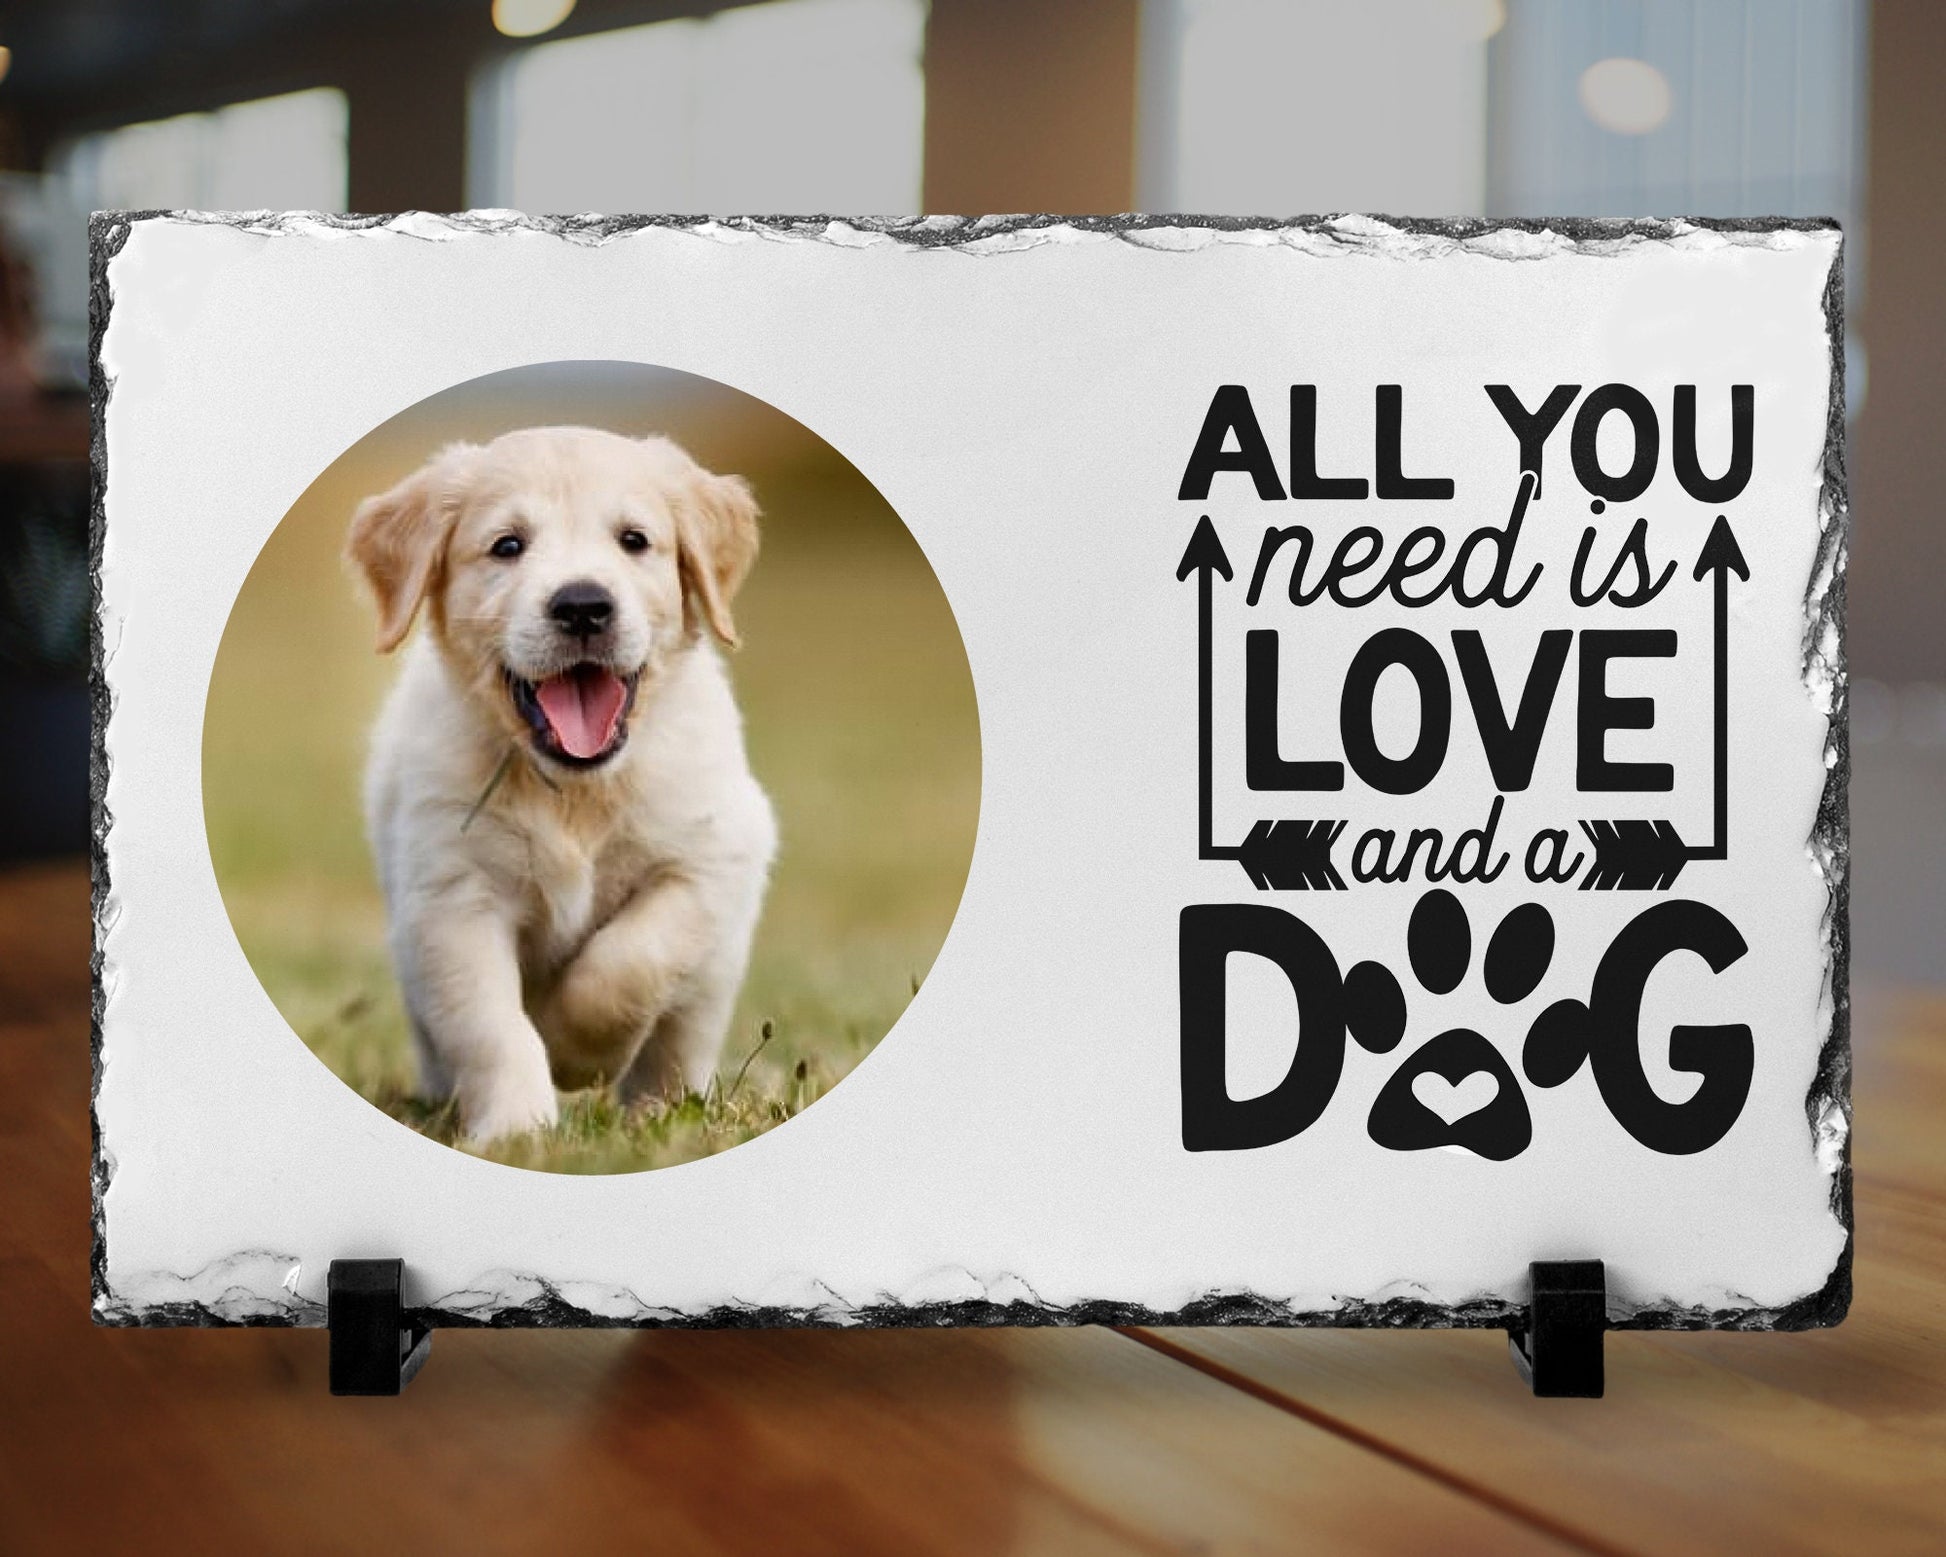 Personalised Dog Photo Frame - Dog Print Gift - Natural Slate - All You Need Is Love & A Dog